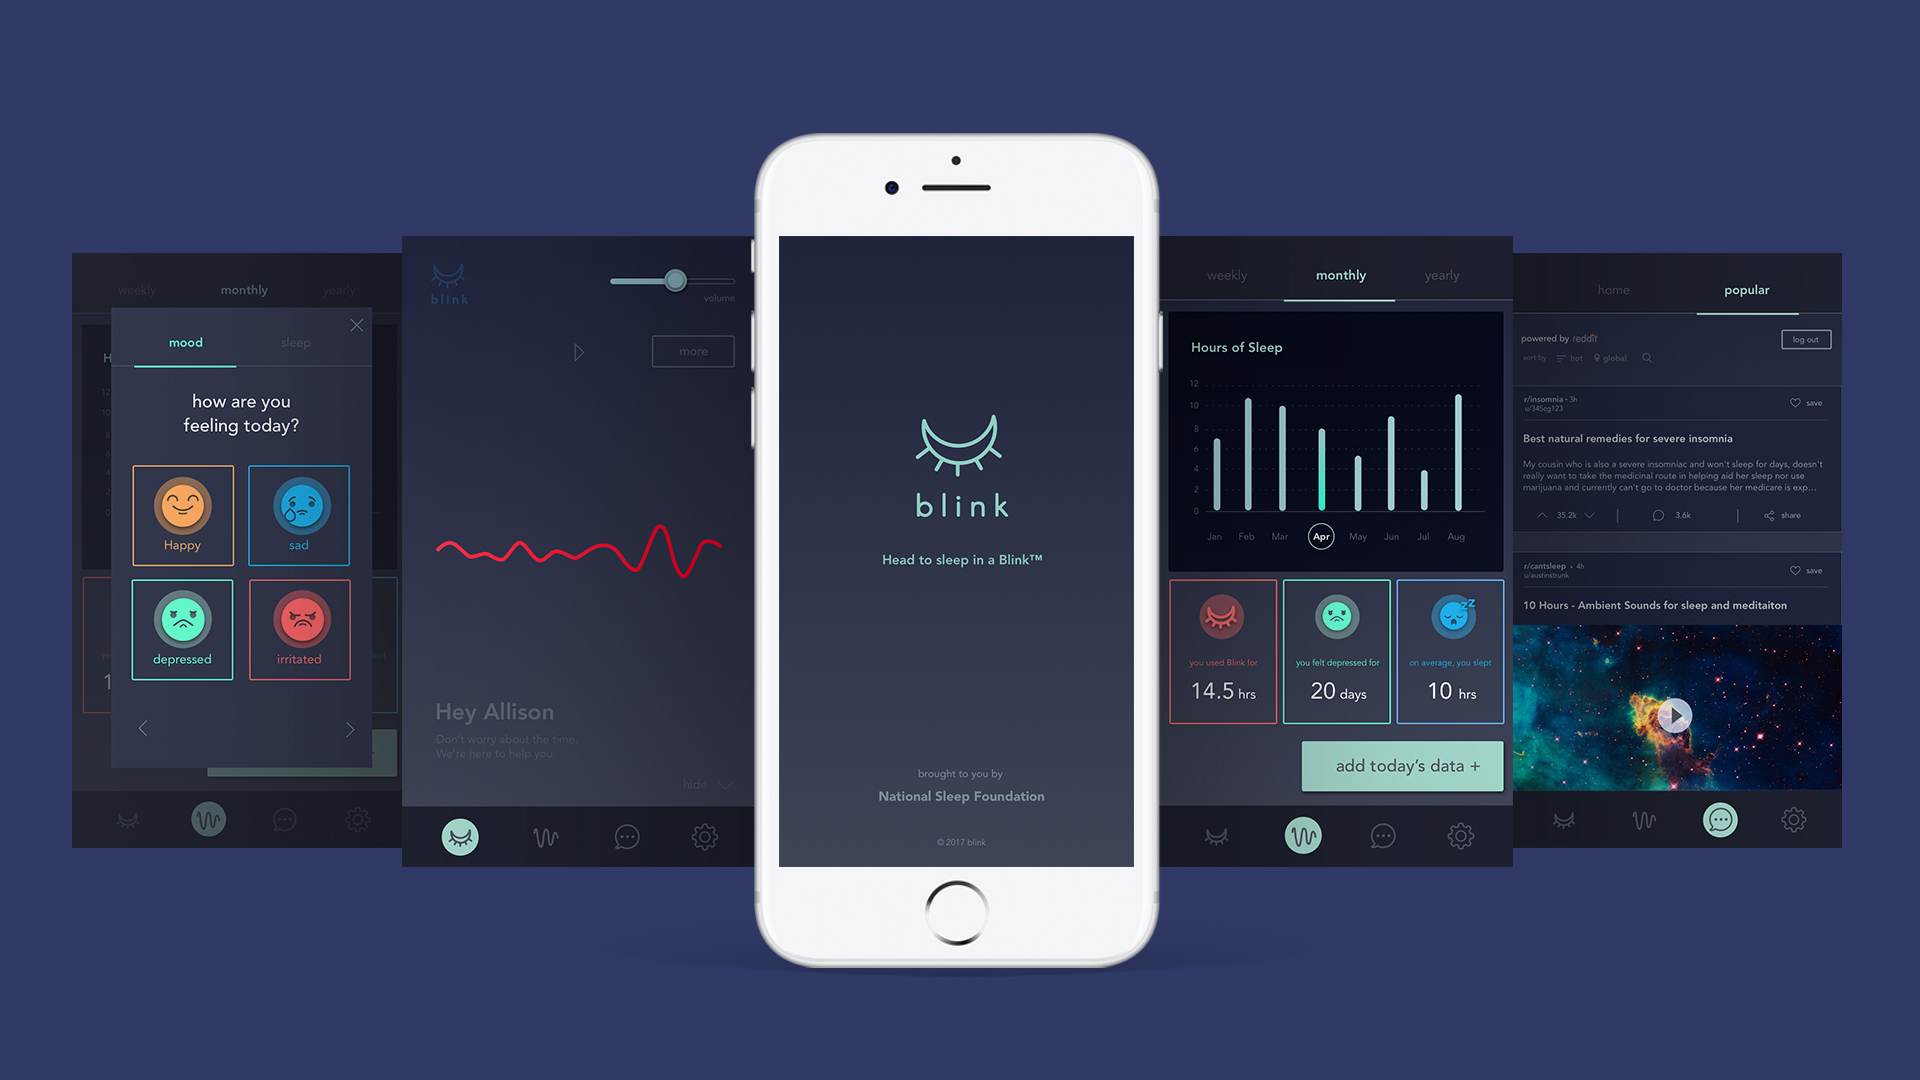 Annie Lee | Digital | Blink, an app that helps young adults manage their sleeping routine and the quality of their sleep